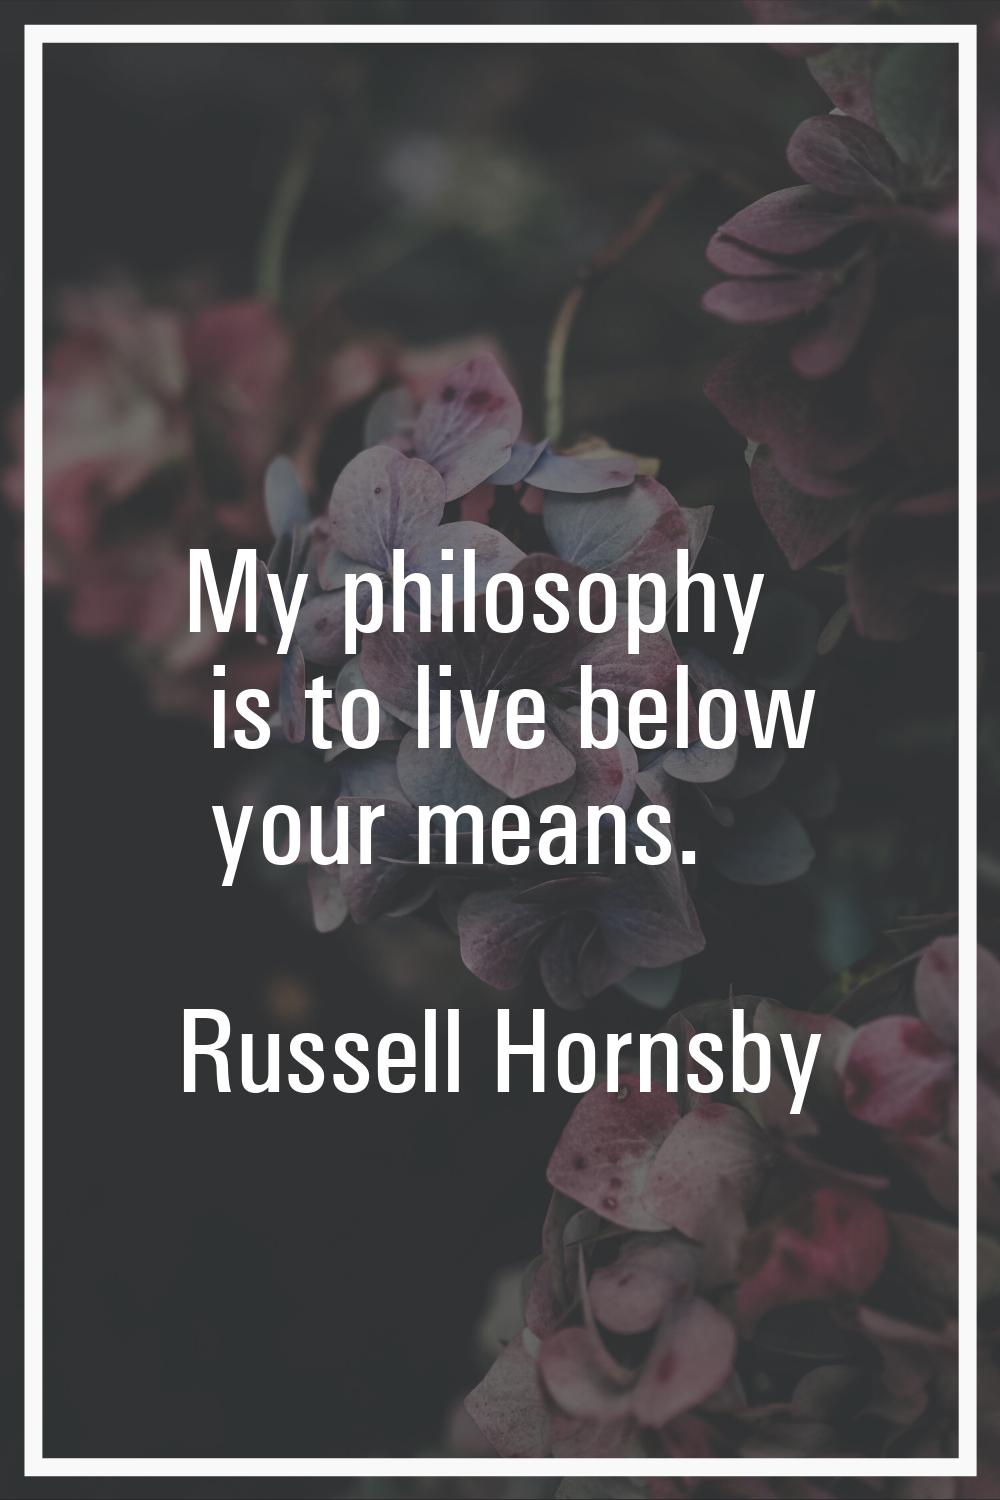 My philosophy is to live below your means.